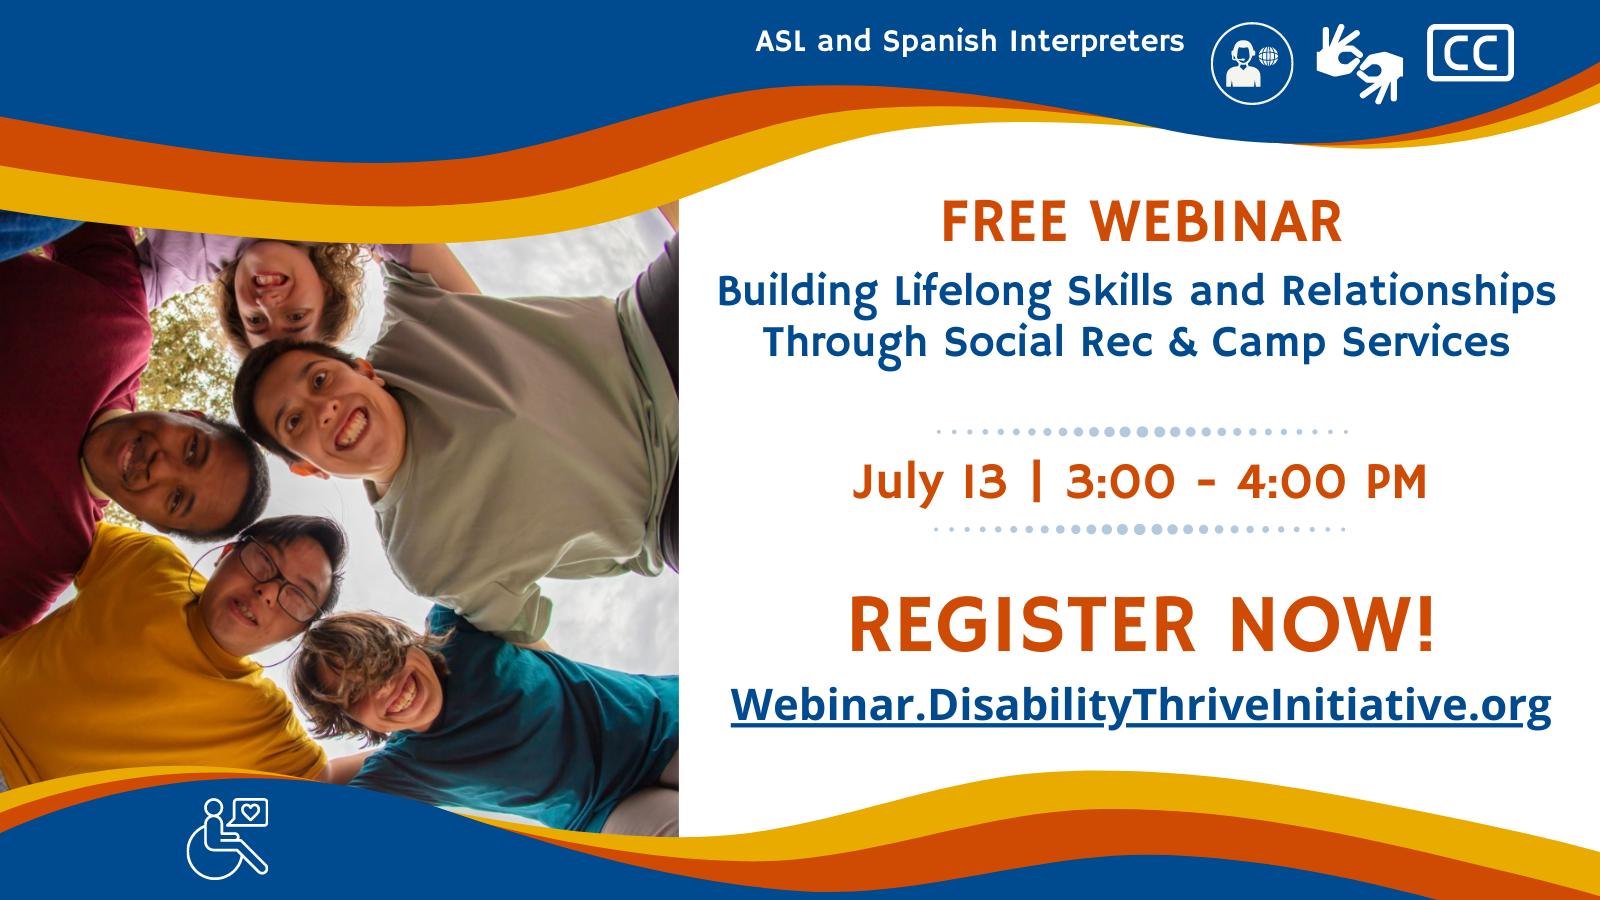 Free webinar: Building Lifelong Skills and Relationships Through Social Rec & Camp Services, July 13, 3:00 – 4:00 p.m., American sign language and Spanish interpreters, Register now.